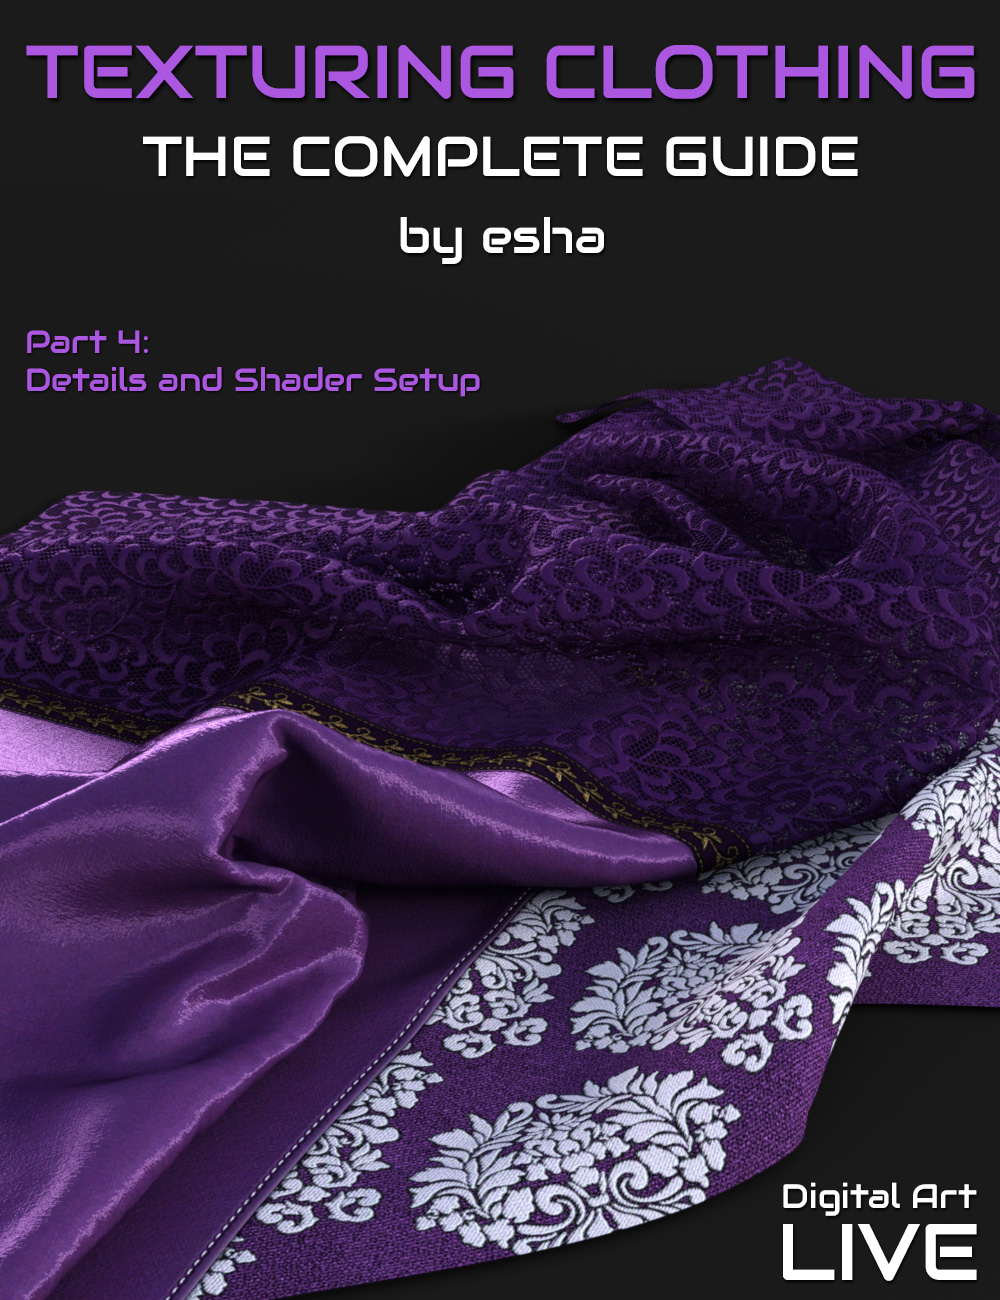 The Complete Guide to Texturing Clothing - Part 4 by: eshaCganDigital Art Live, 3D Models by Daz 3D